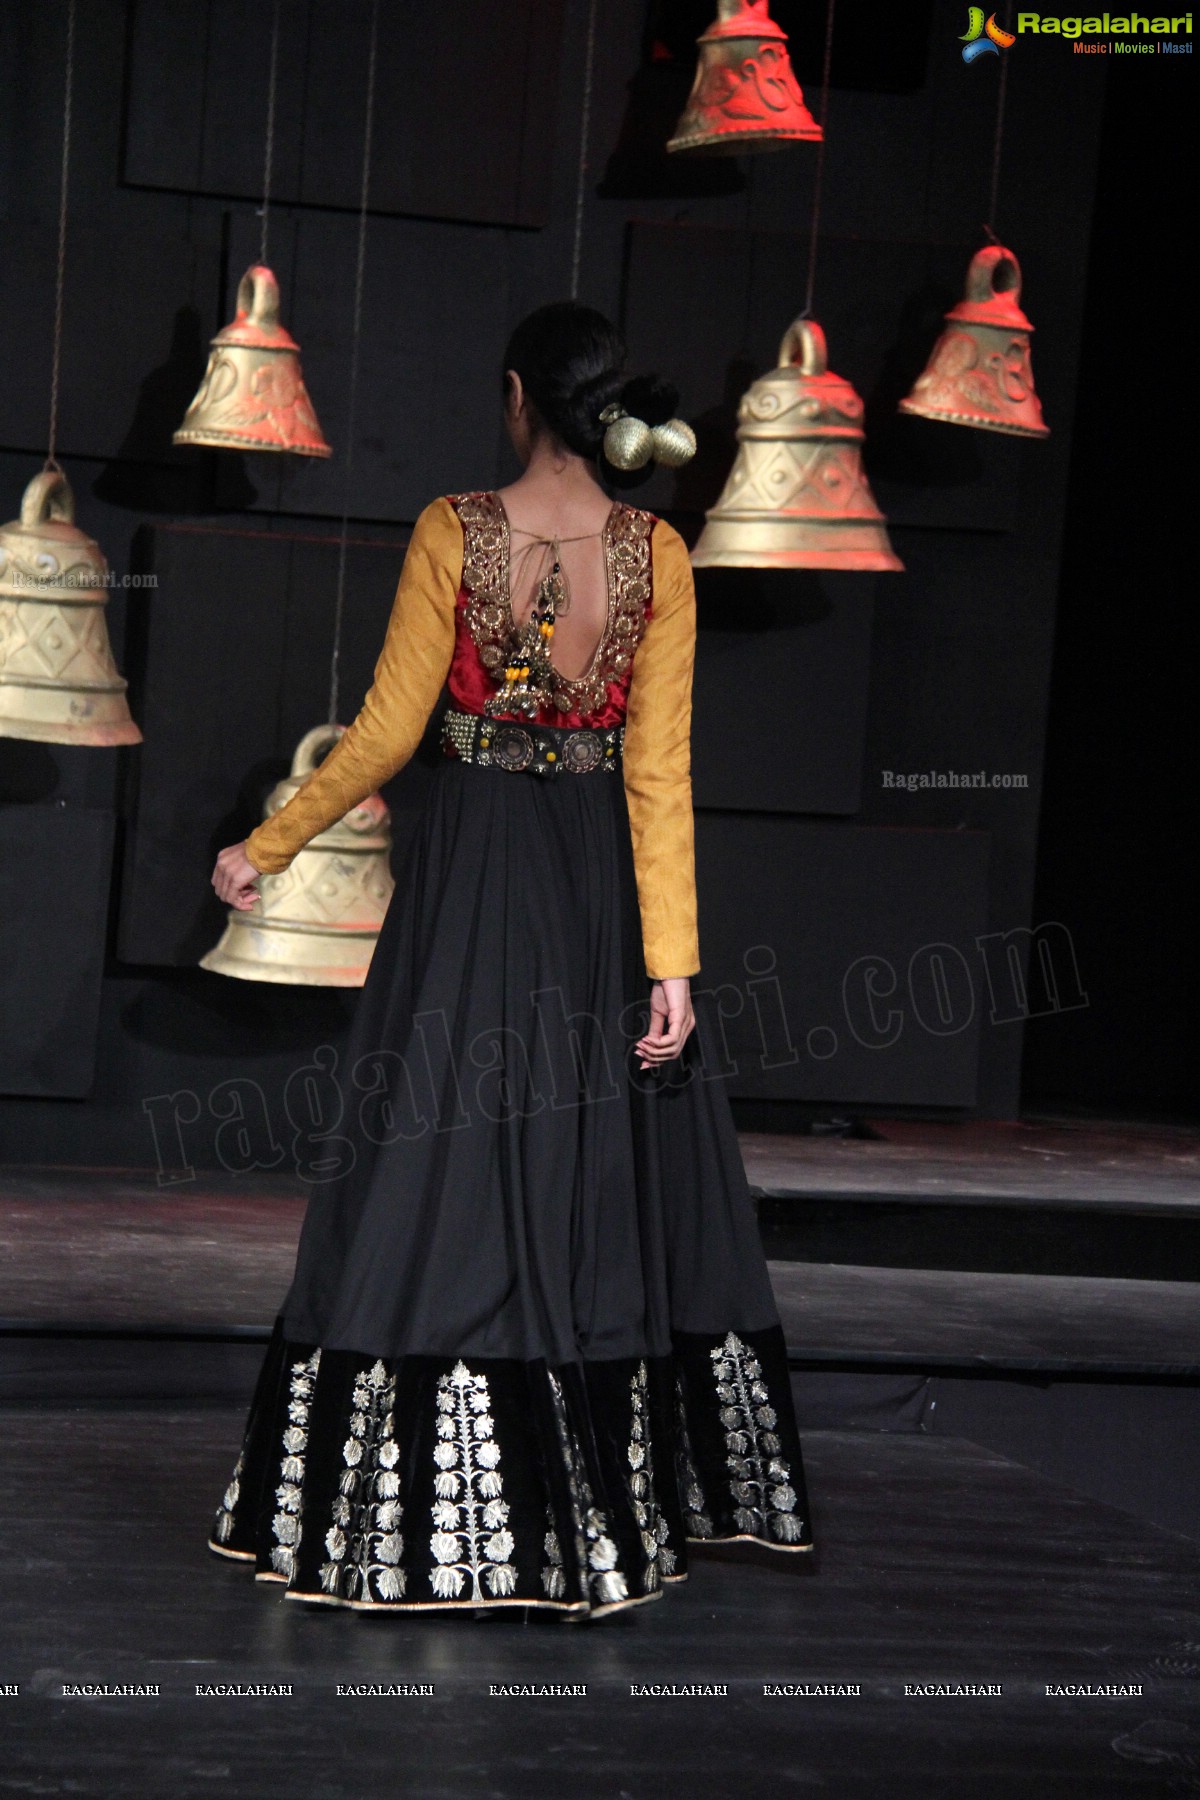 Blenders Pride Fashion Tour 2013, Hyderabad (Day 1)